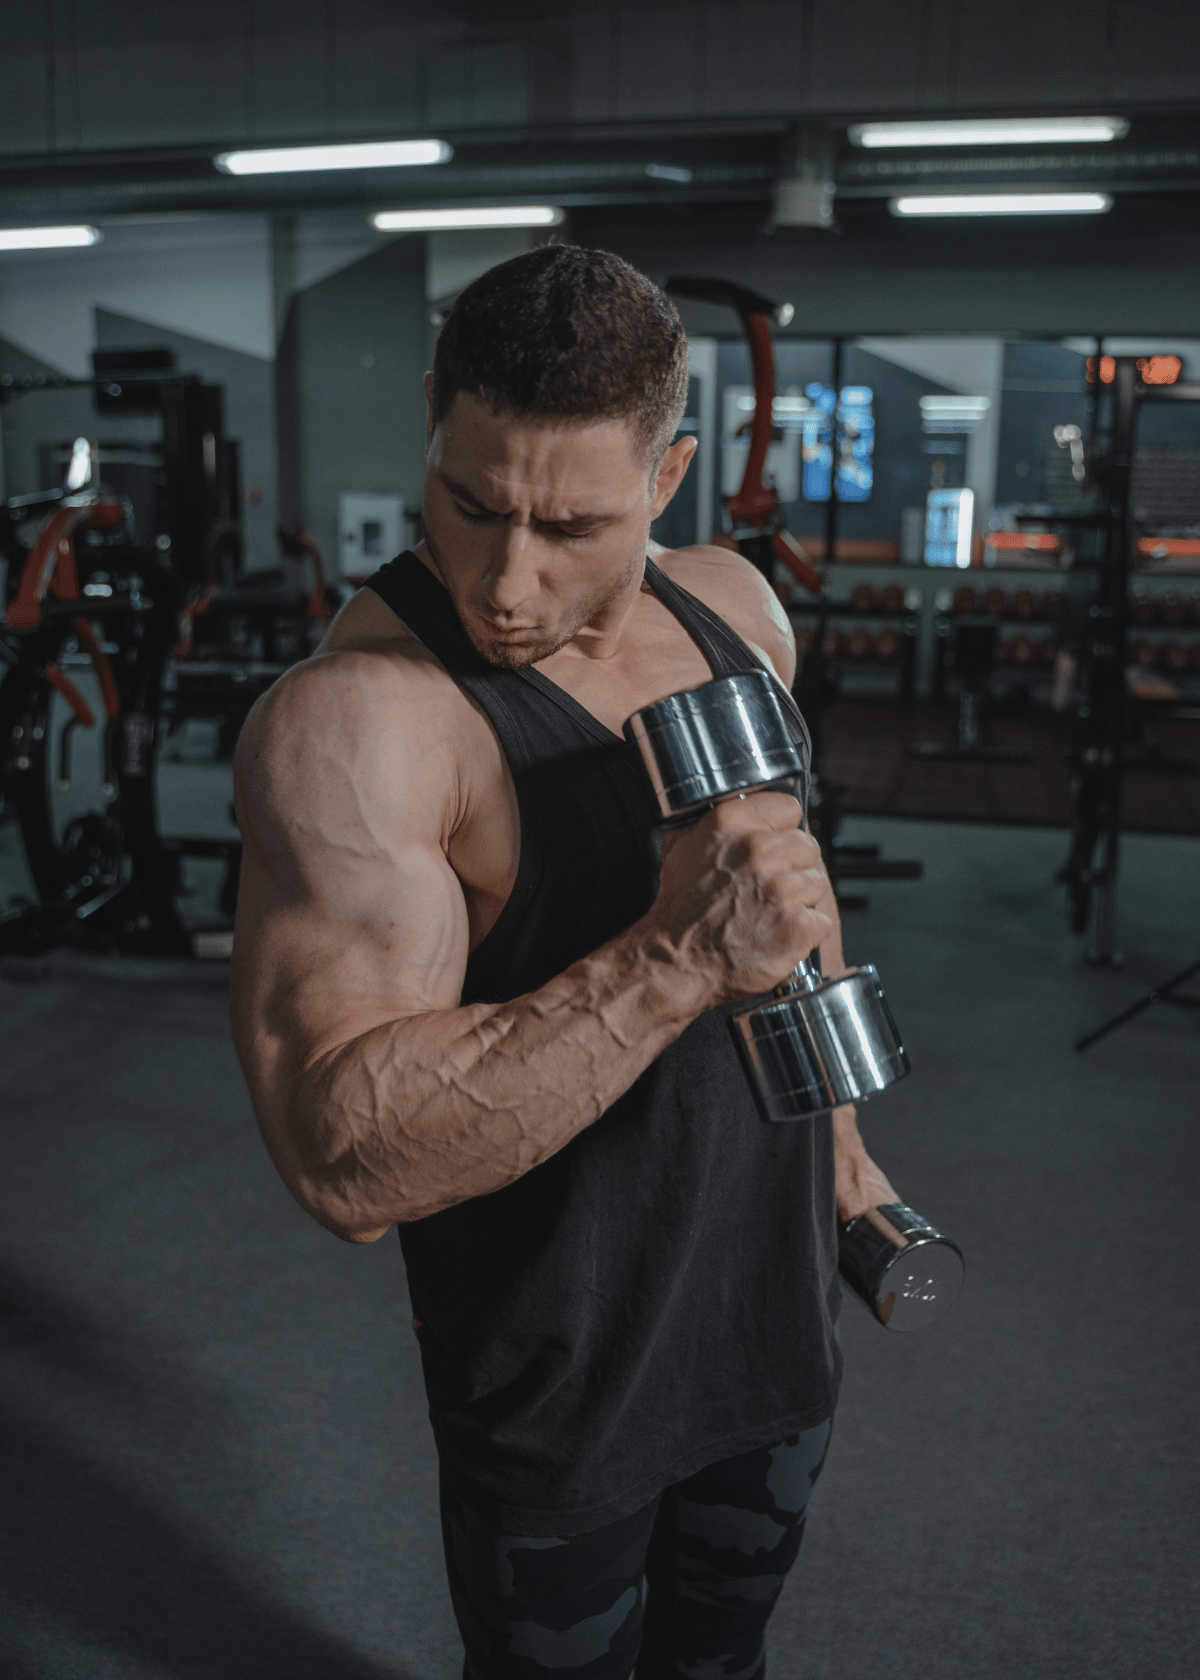 Best Multivitamin For Muscle Growth